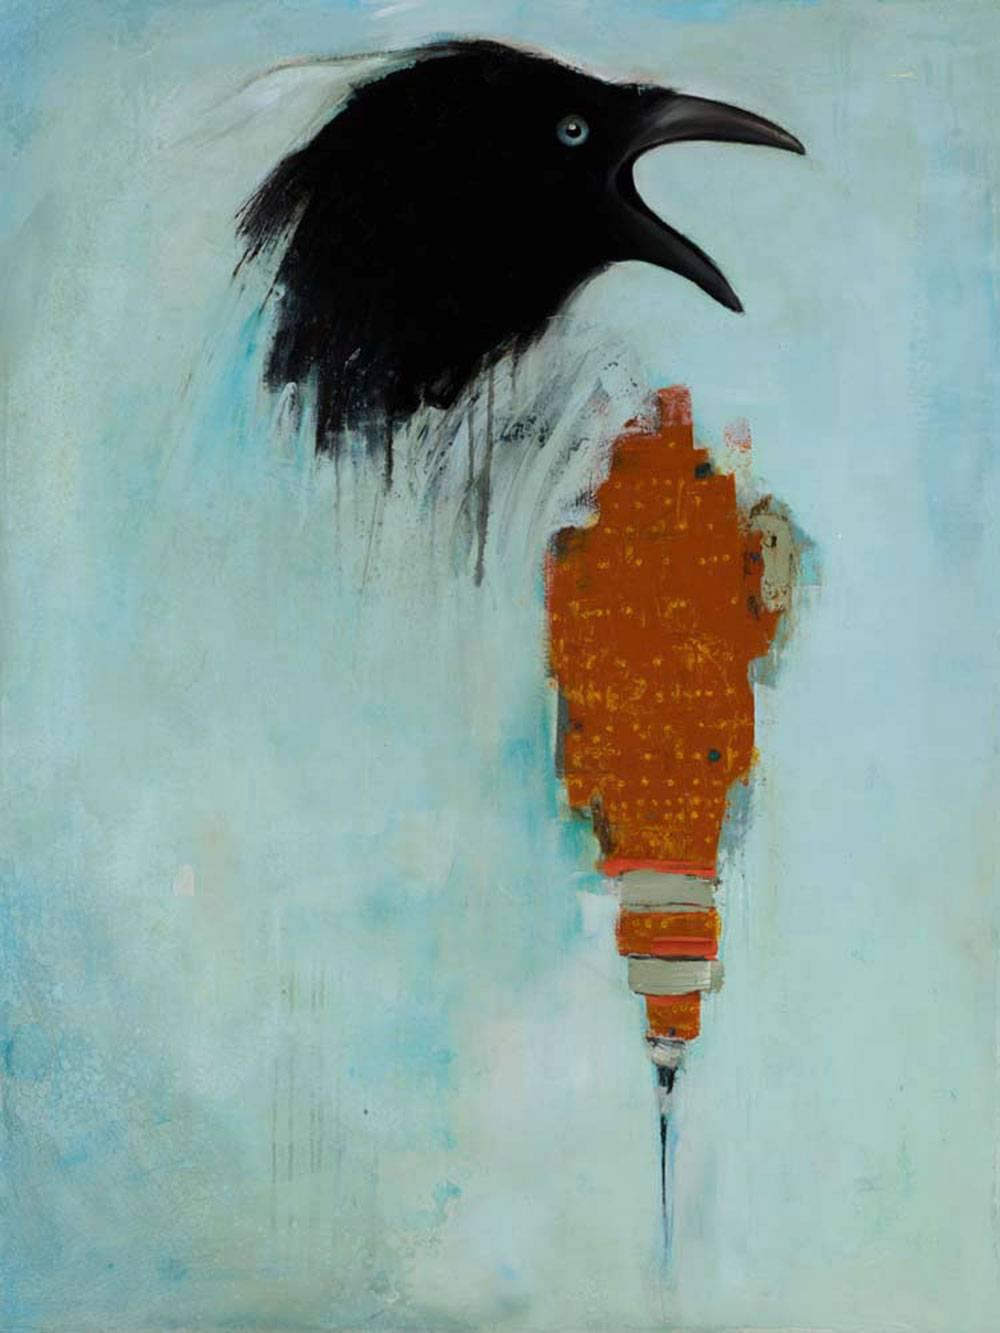 Michele Mikesell Animal Painting - Go Dolphin Home, animal abstract painting, oil on canvas, blue with black bird